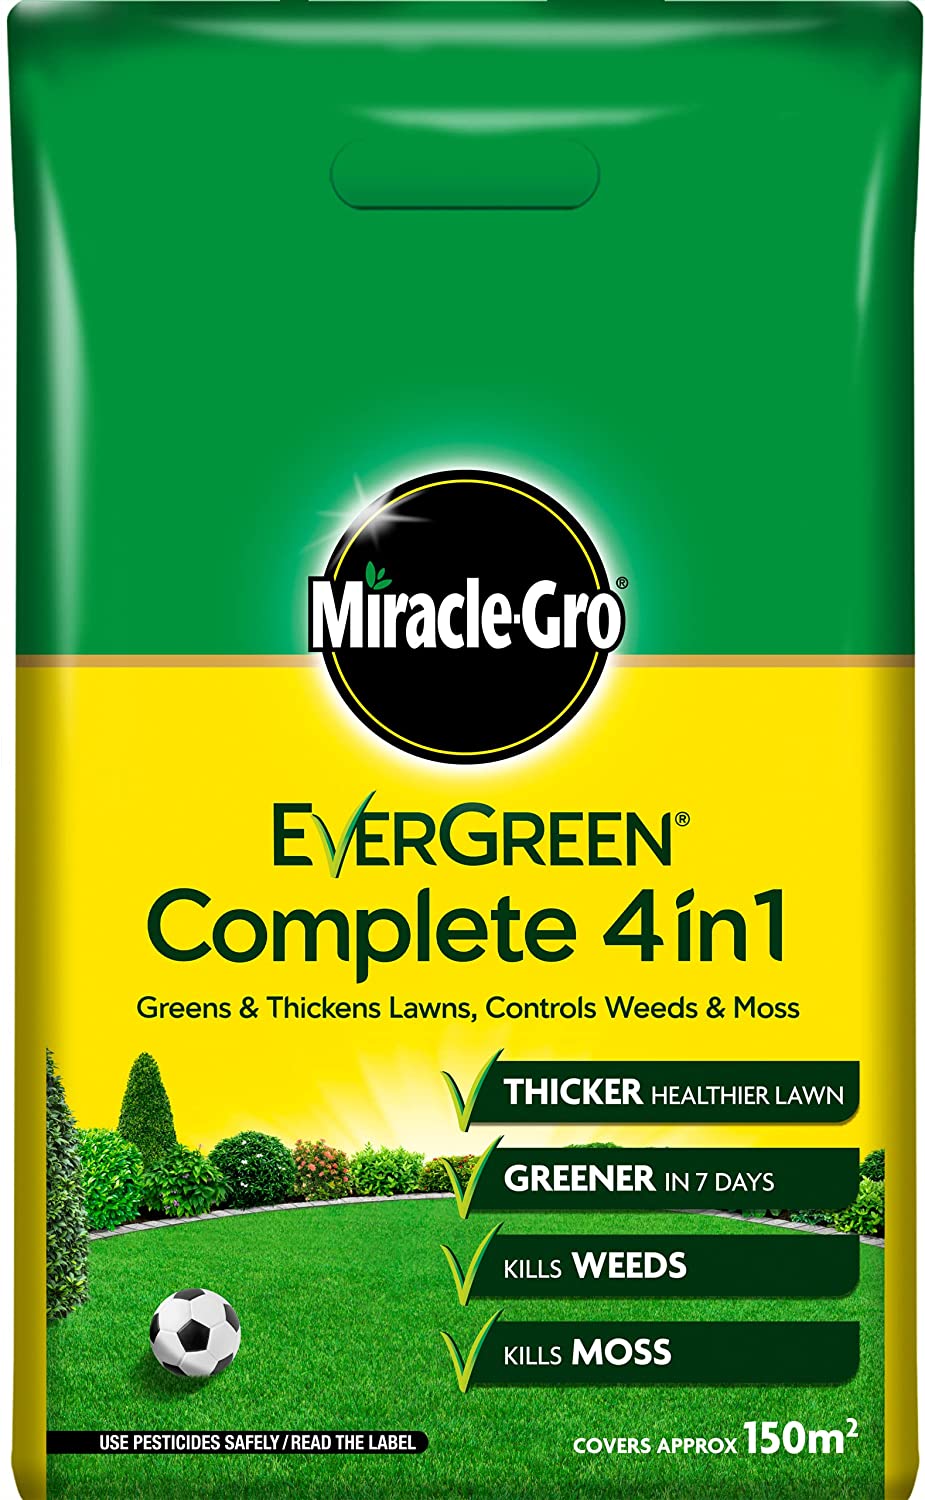 Miracle-Gro Complete 4 in 1 Lawn Food 150 m2 (New 'Easy Carry' Bag) Lawn food Weed & Moss Control